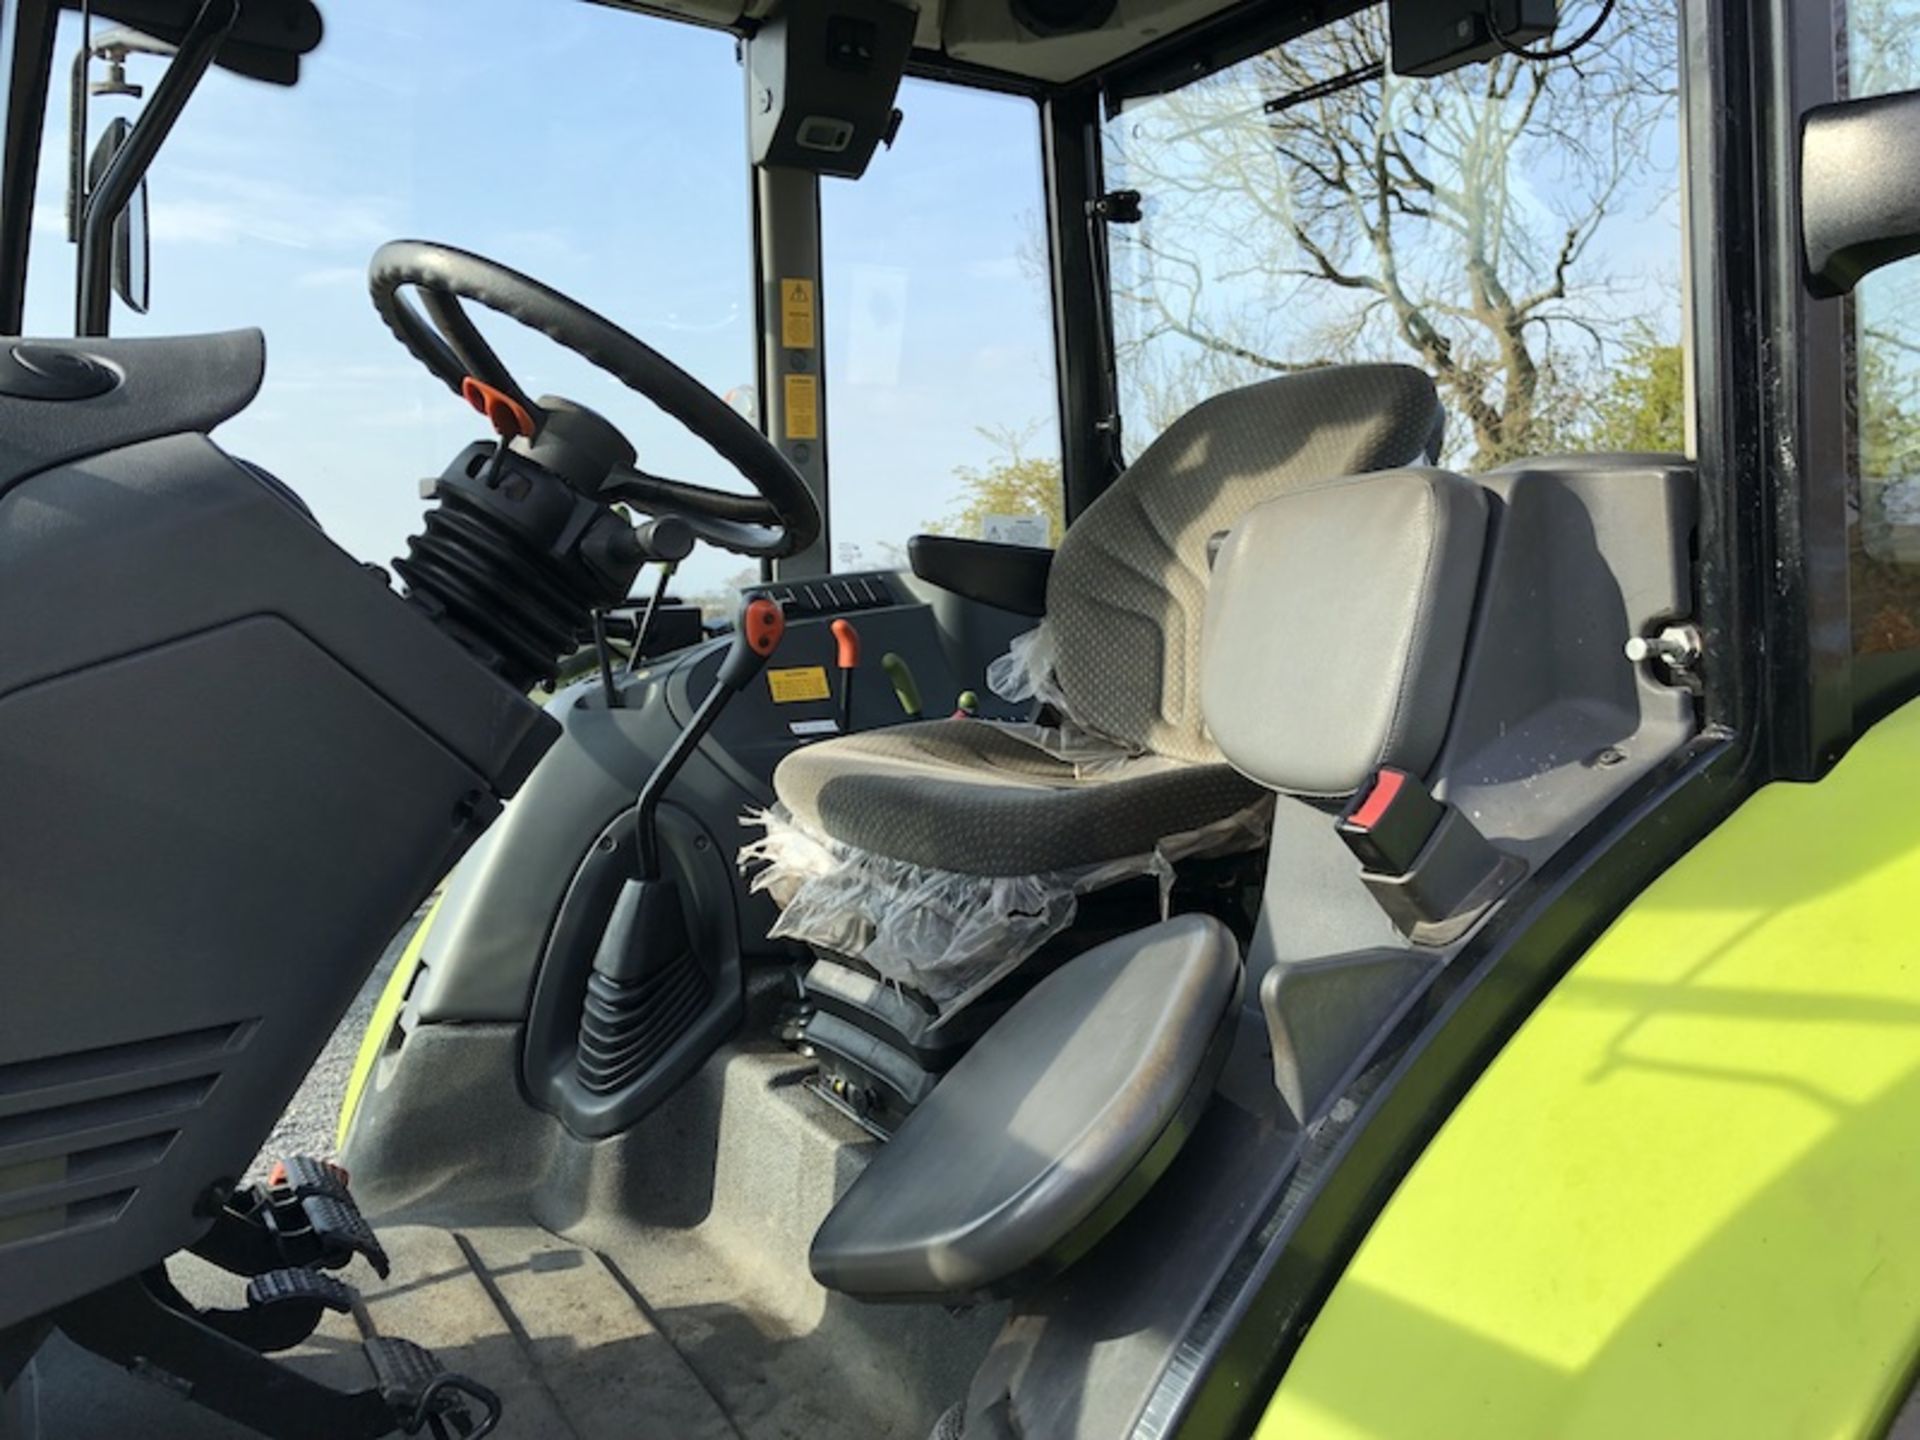 Claas Axos 340 Cx Tractor - Image 7 of 8